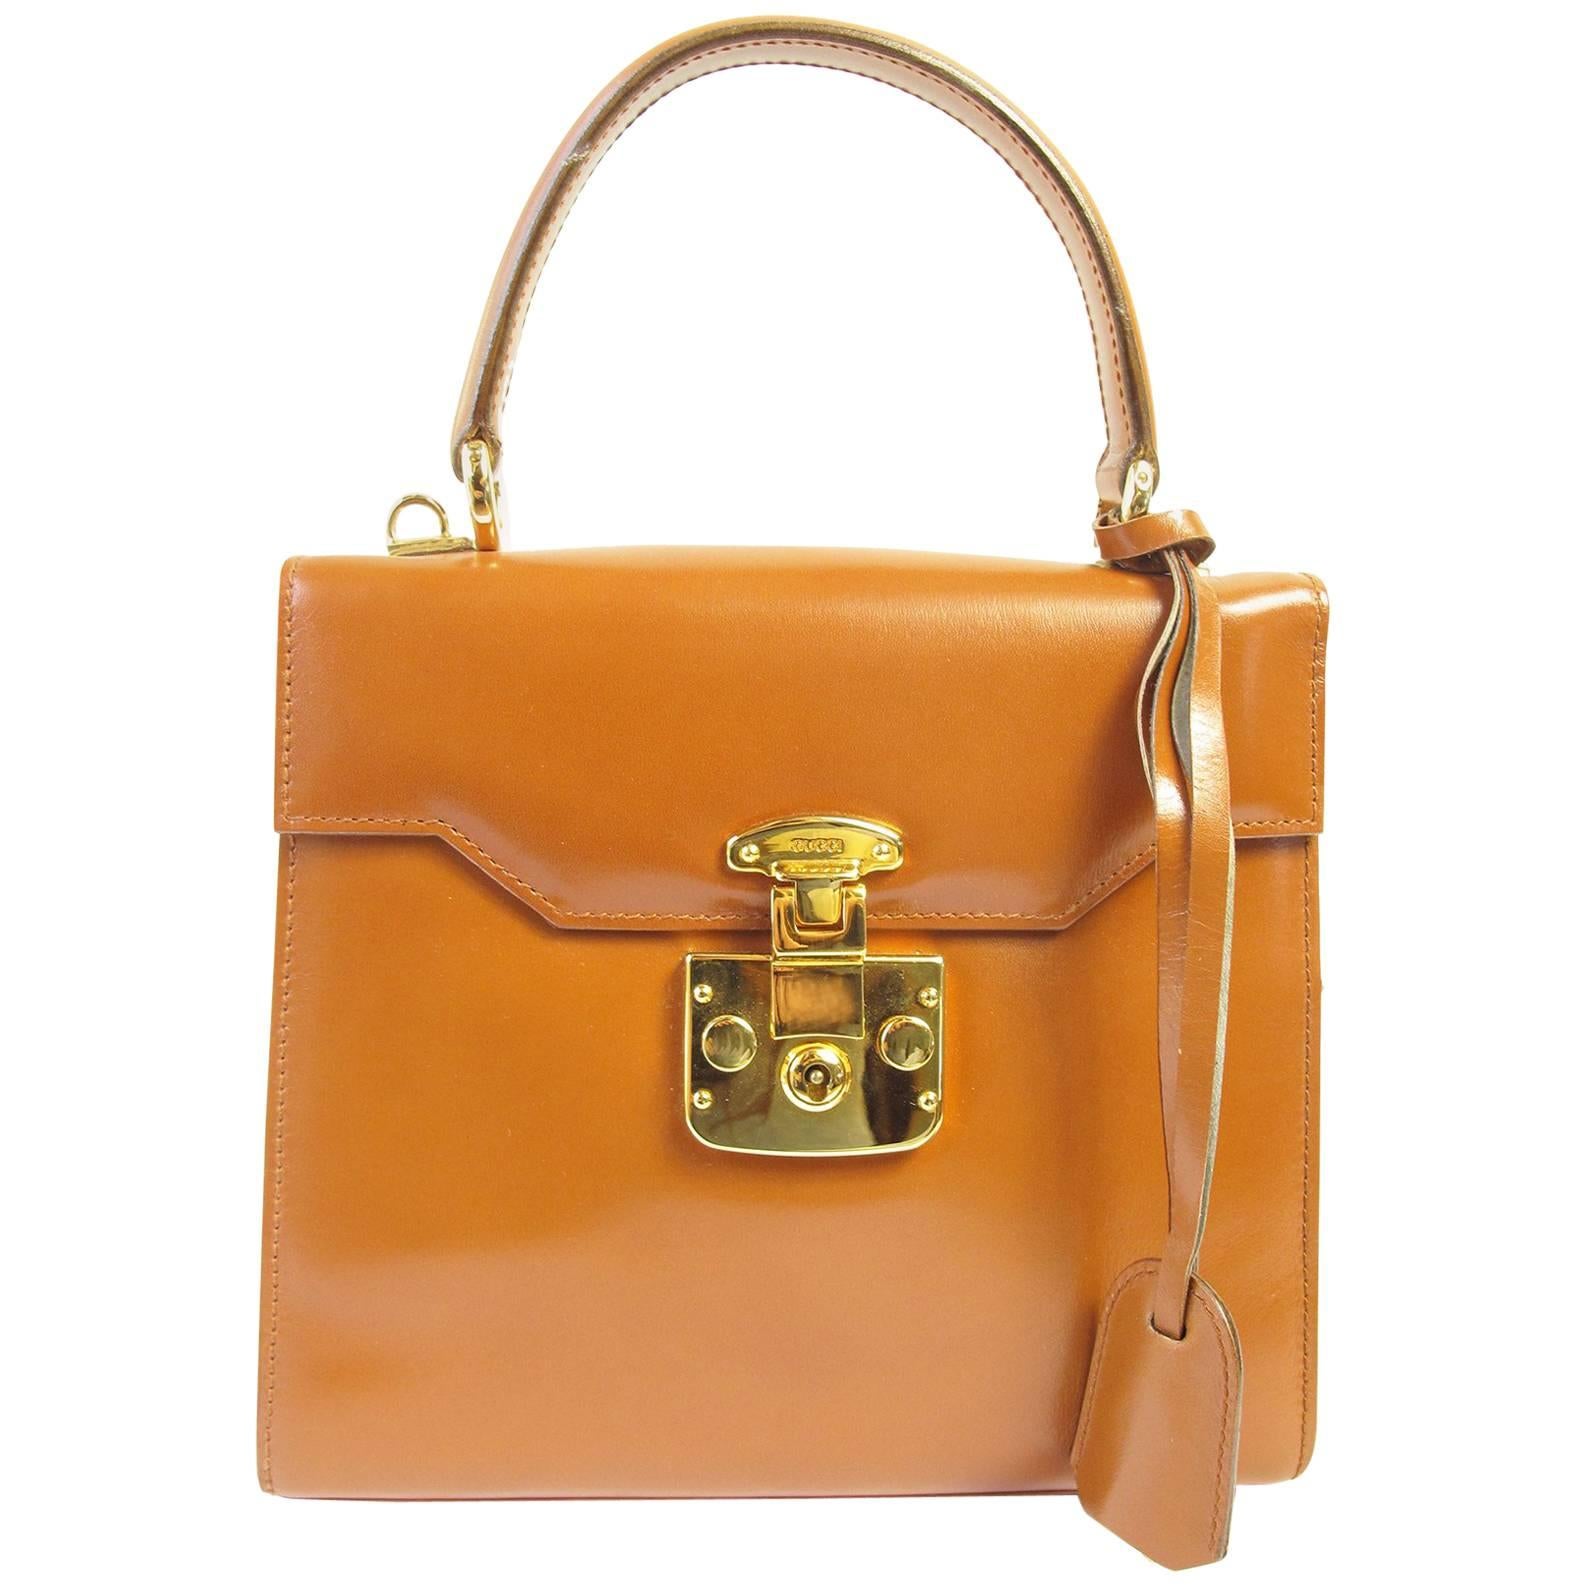 Gucci Top Handle Caramel Leather Bag with Strap